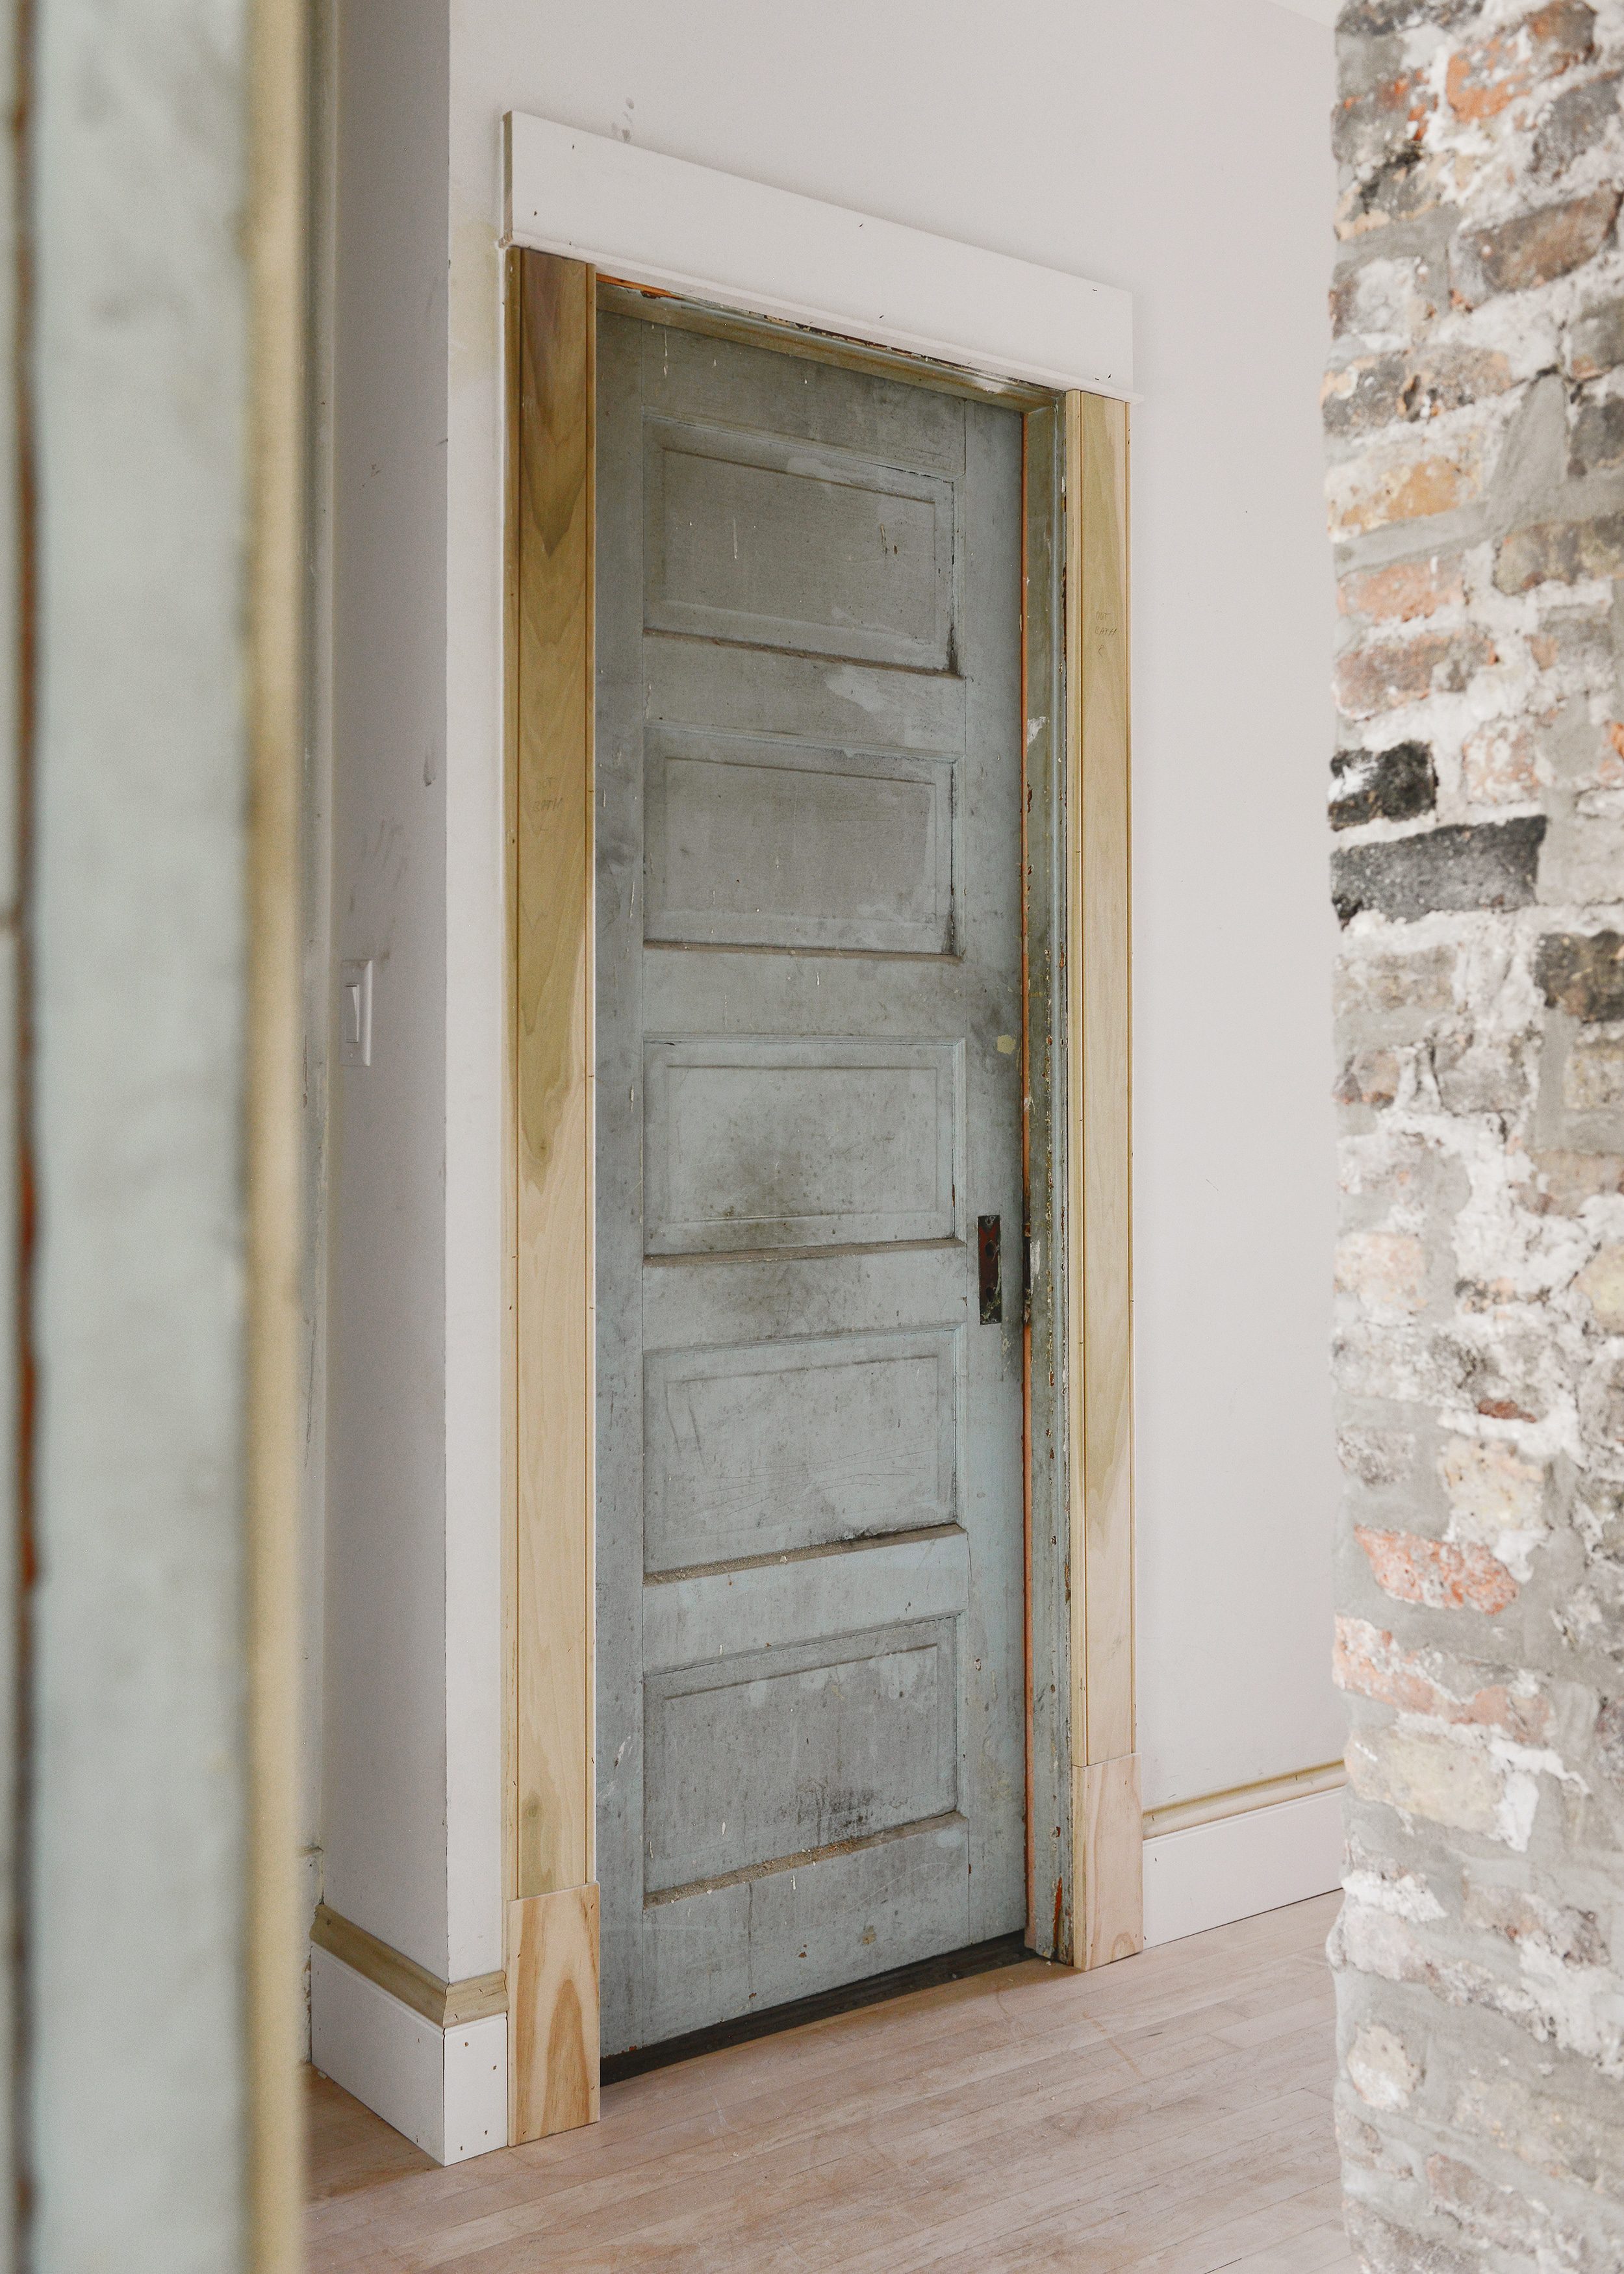 A view of a 5 panel door with new millwork and a brick chimney nearby | via Yellow Brick Home